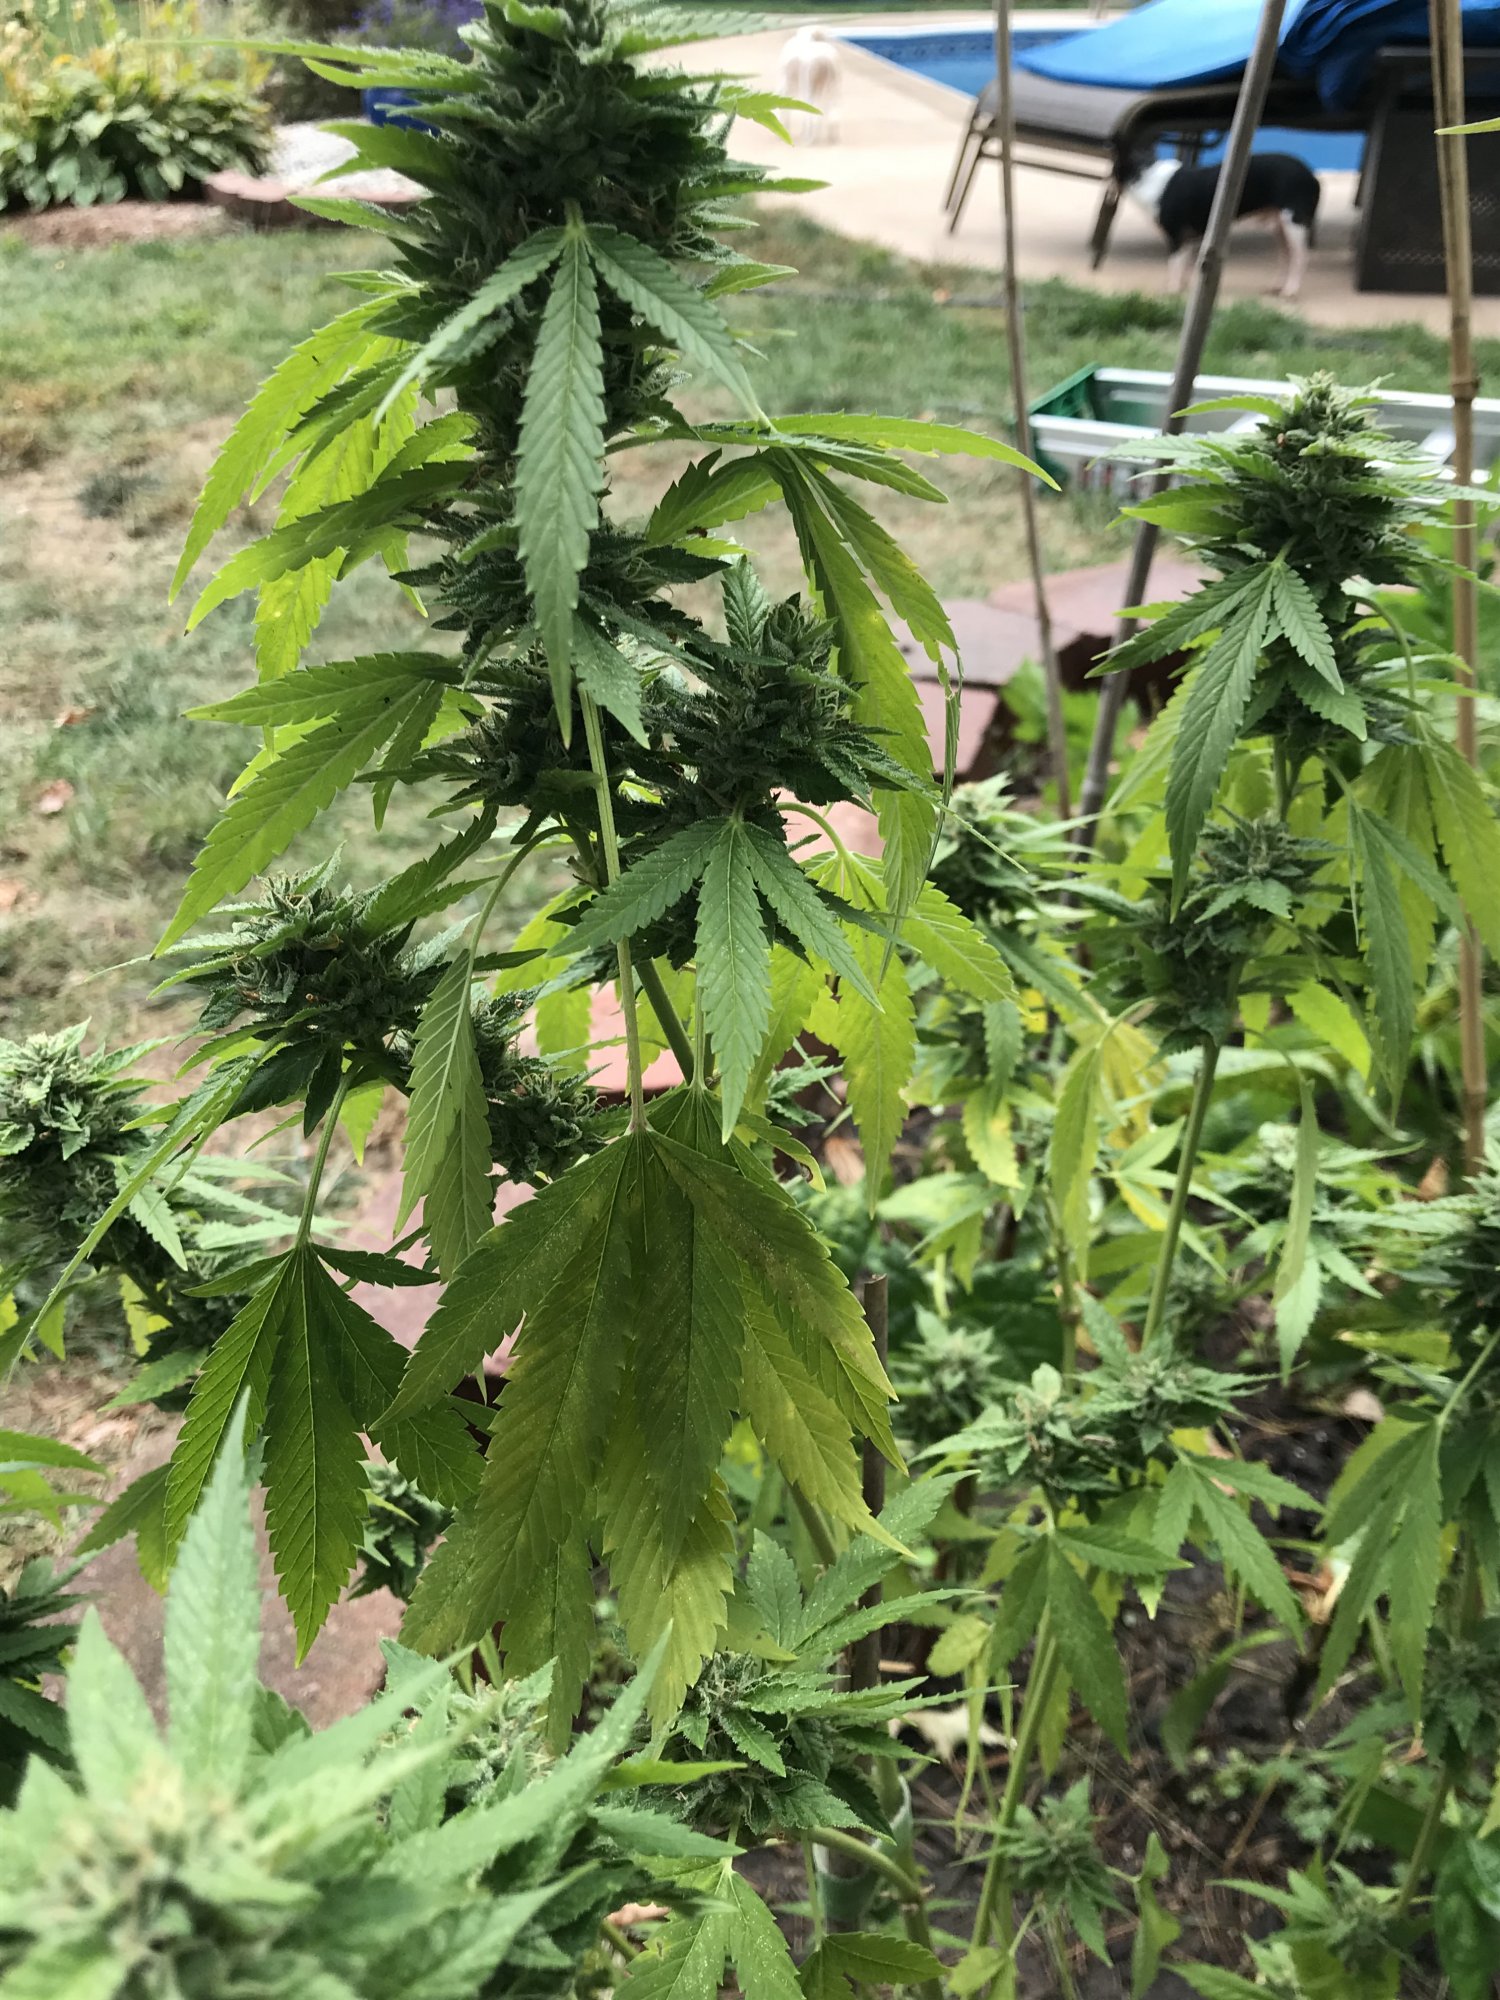 First timer needs help with outdoor grow 5